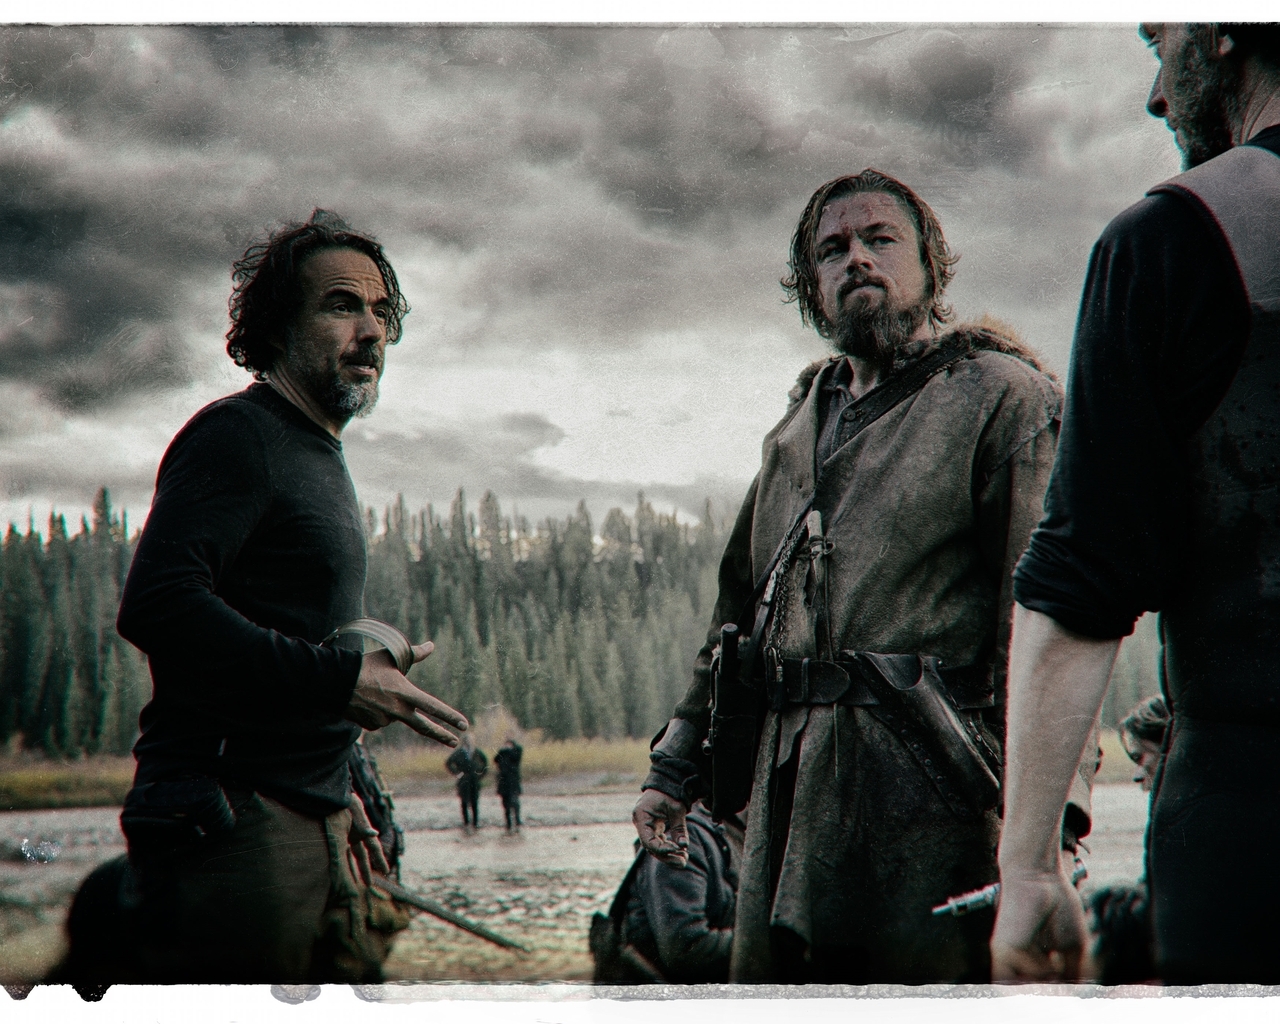 The Revenant Cast for 1280 x 1024 resolution